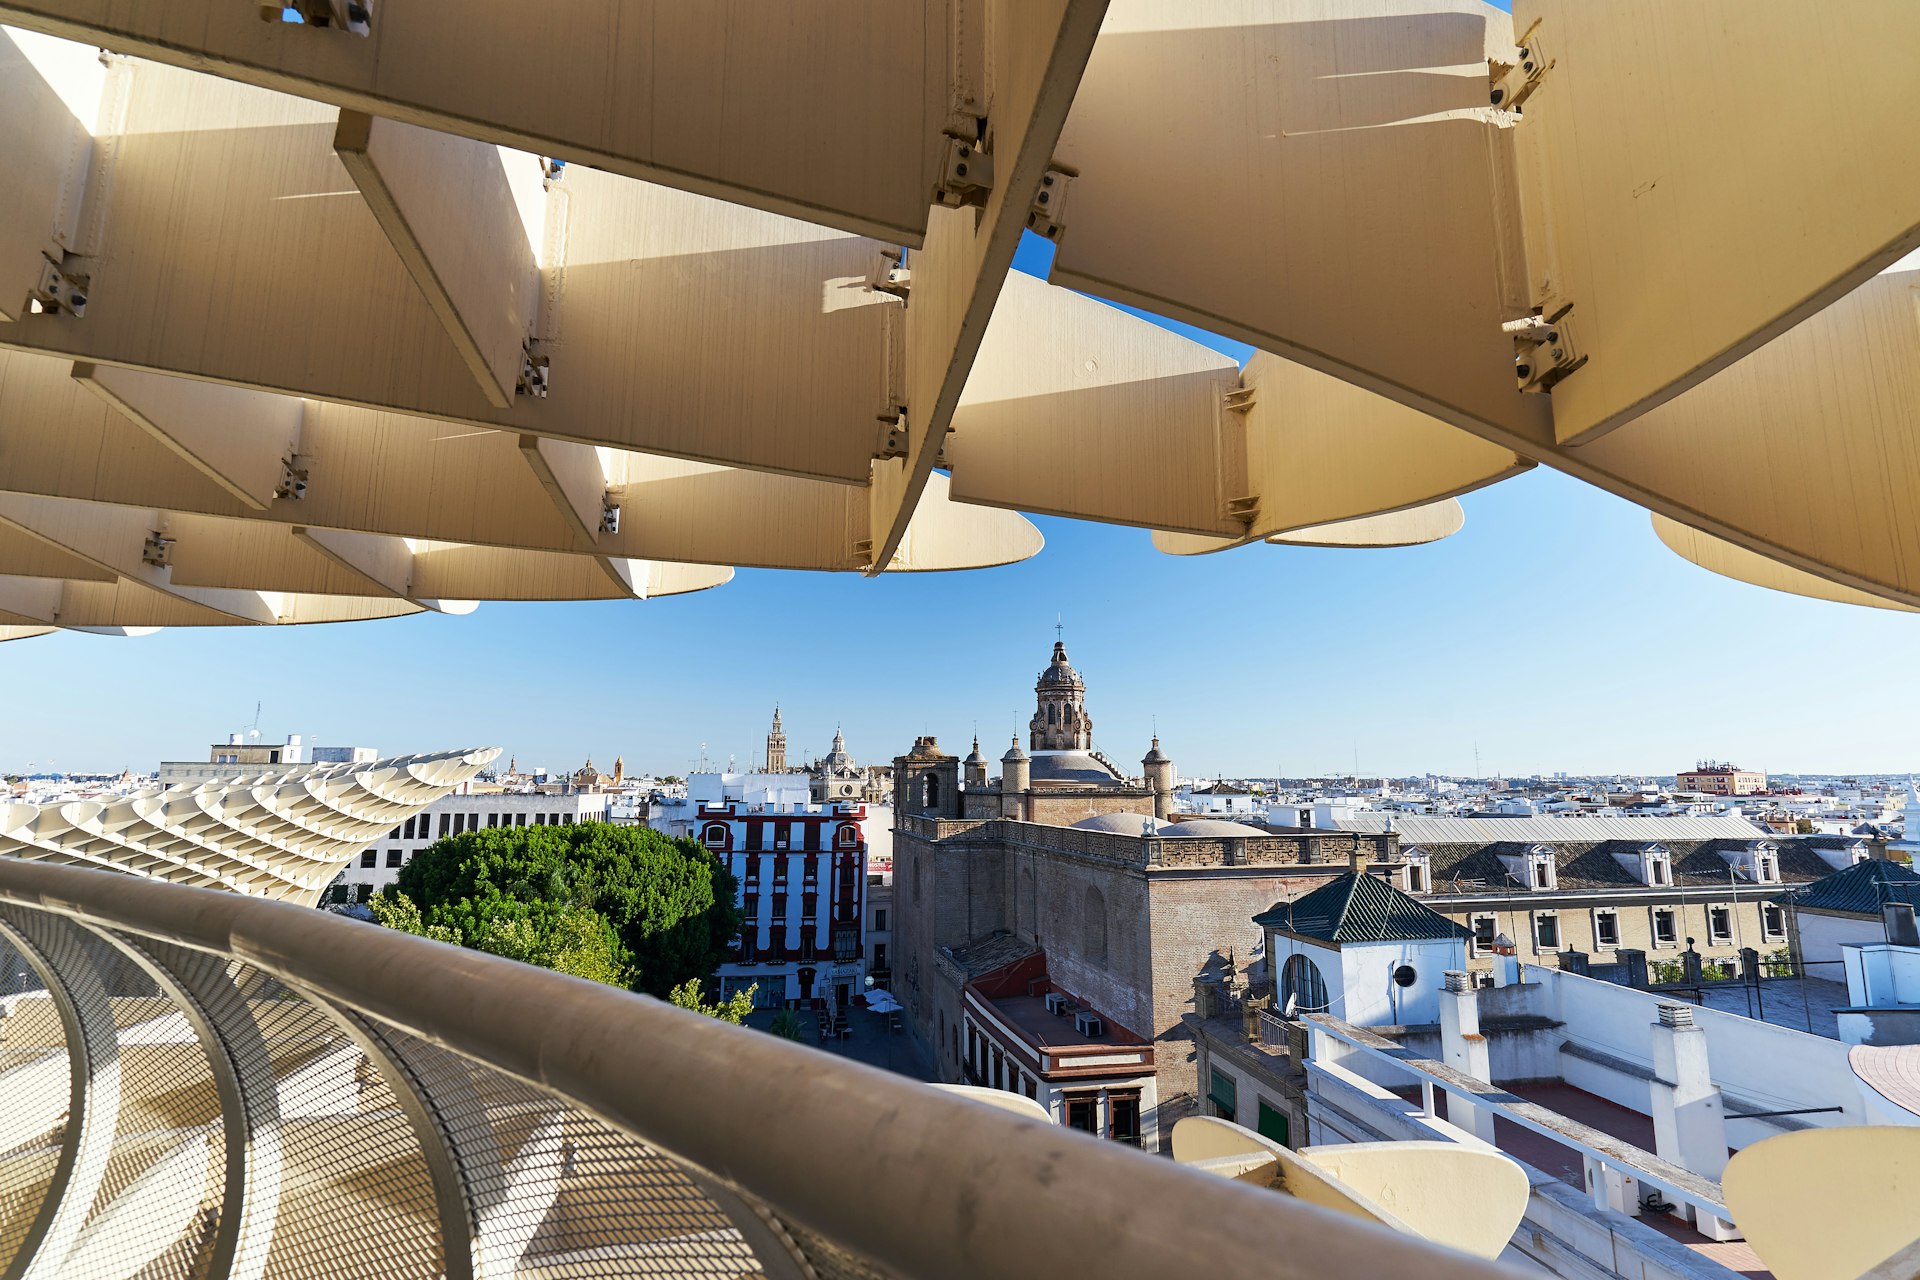 A wooden modern elevated walkway offering views over older city buildings